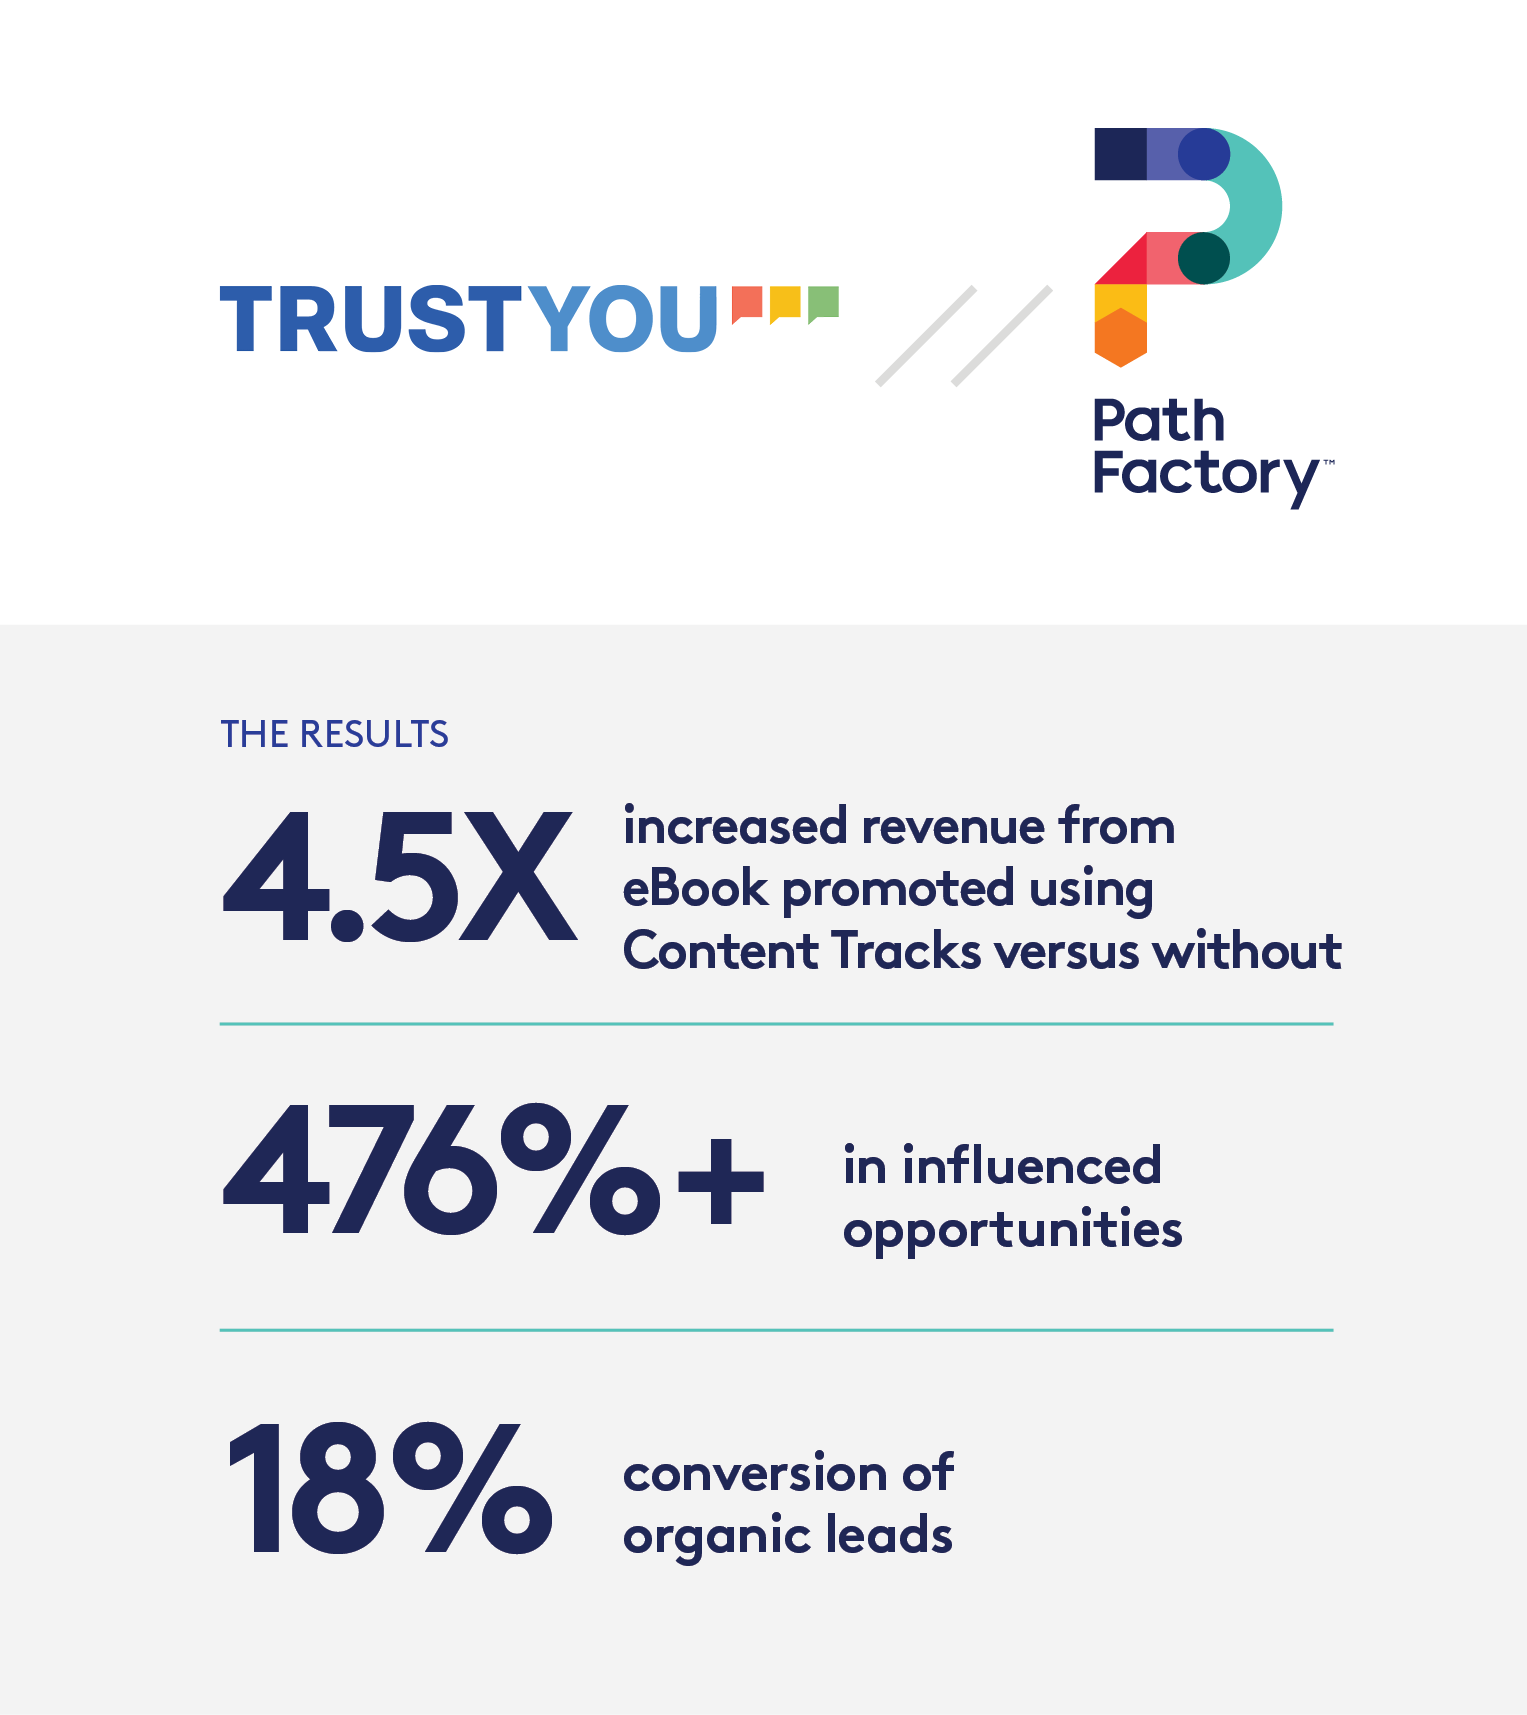 Thumbnail featuring the colour Trust You and Pathfactory Logos. Underneath on a grey block results of the case study are listed. 1. 4.5x increase revenue from eBook promoted using Content Tracks versus without 2. 476%+ in influenced opportunities 3. 18% conversion of organic leads